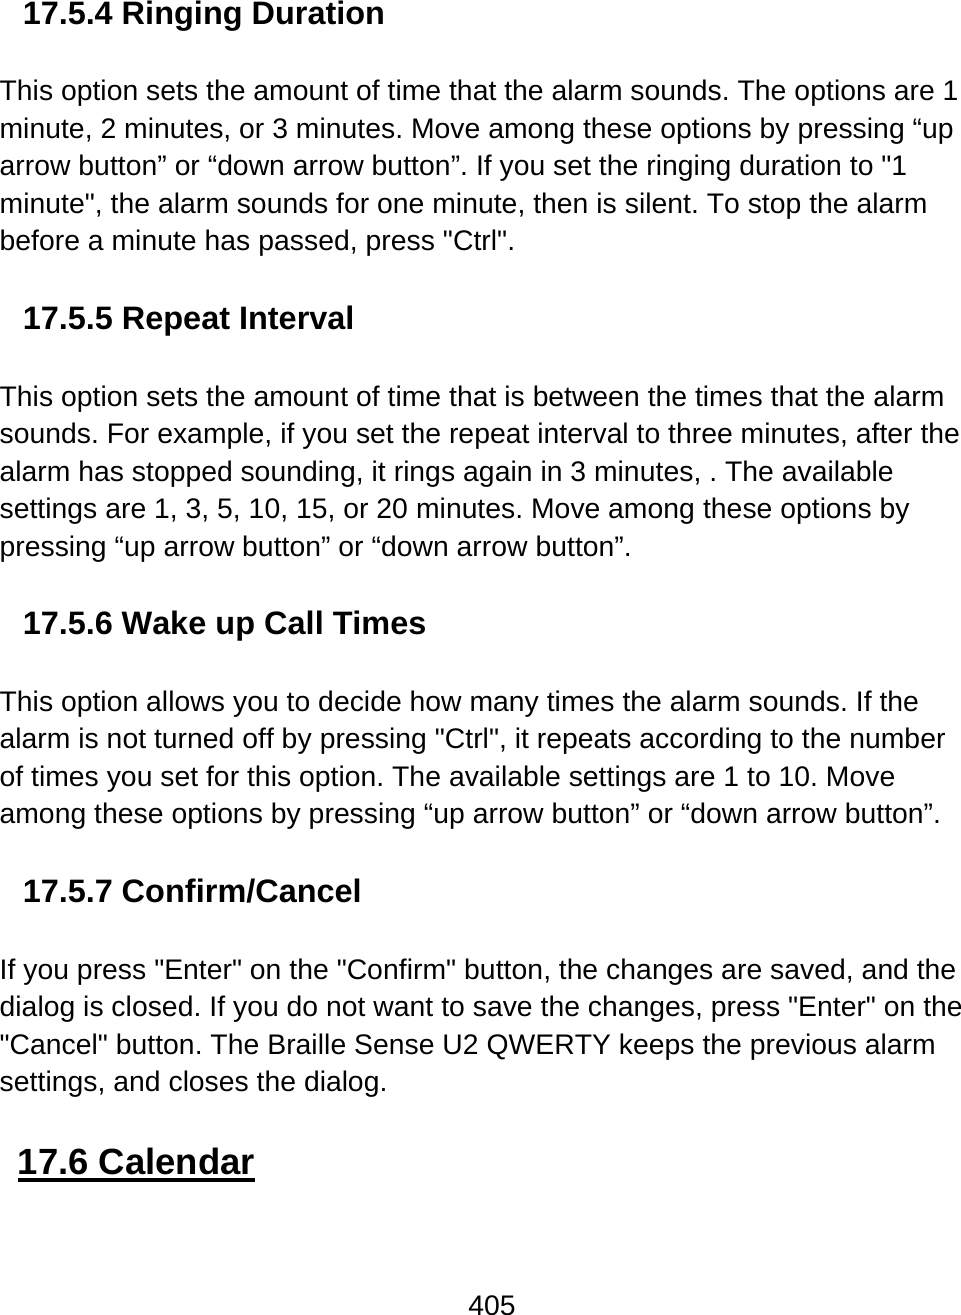 405  17.5.4 Ringing Duration  This option sets the amount of time that the alarm sounds. The options are 1 minute, 2 minutes, or 3 minutes. Move among these options by pressing “up arrow button” or “down arrow button”. If you set the ringing duration to &quot;1 minute&quot;, the alarm sounds for one minute, then is silent. To stop the alarm before a minute has passed, press &quot;Ctrl&quot;.  17.5.5 Repeat Interval  This option sets the amount of time that is between the times that the alarm sounds. For example, if you set the repeat interval to three minutes, after the alarm has stopped sounding, it rings again in 3 minutes, . The available settings are 1, 3, 5, 10, 15, or 20 minutes. Move among these options by pressing “up arrow button” or “down arrow button”.   17.5.6 Wake up Call Times  This option allows you to decide how many times the alarm sounds. If the alarm is not turned off by pressing &quot;Ctrl&quot;, it repeats according to the number of times you set for this option. The available settings are 1 to 10. Move among these options by pressing “up arrow button” or “down arrow button”.   17.5.7 Confirm/Cancel  If you press &quot;Enter&quot; on the &quot;Confirm&quot; button, the changes are saved, and the dialog is closed. If you do not want to save the changes, press &quot;Enter&quot; on the &quot;Cancel&quot; button. The Braille Sense U2 QWERTY keeps the previous alarm settings, and closes the dialog.  17.6 Calendar  